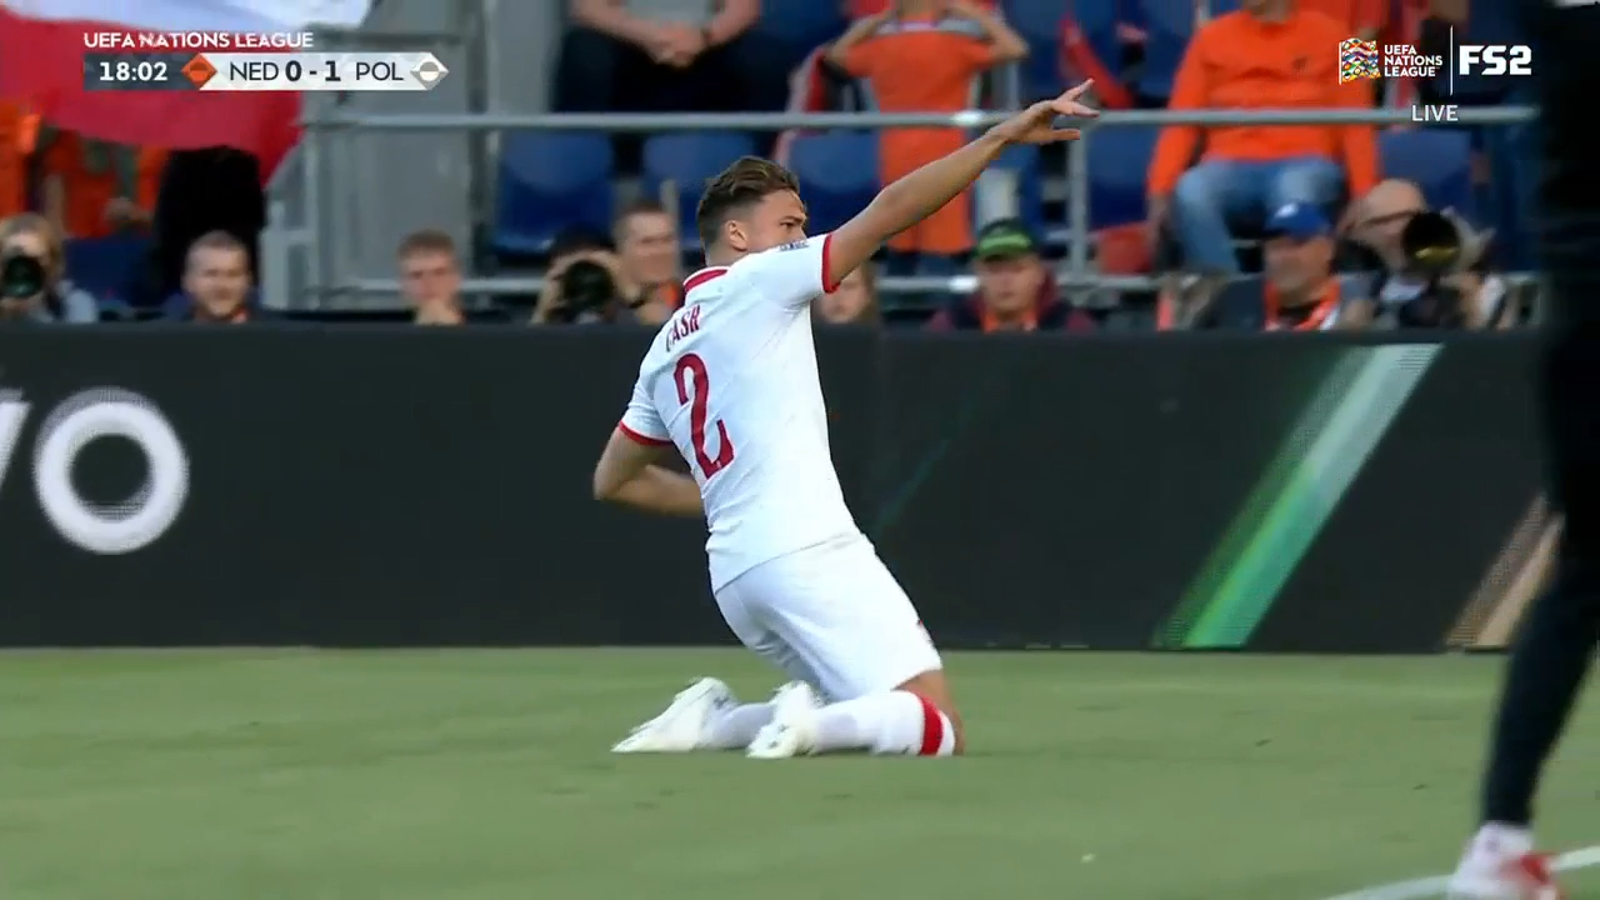 Matty Cash scores a goal to give Poland a 1-0 lead over the Netherlands